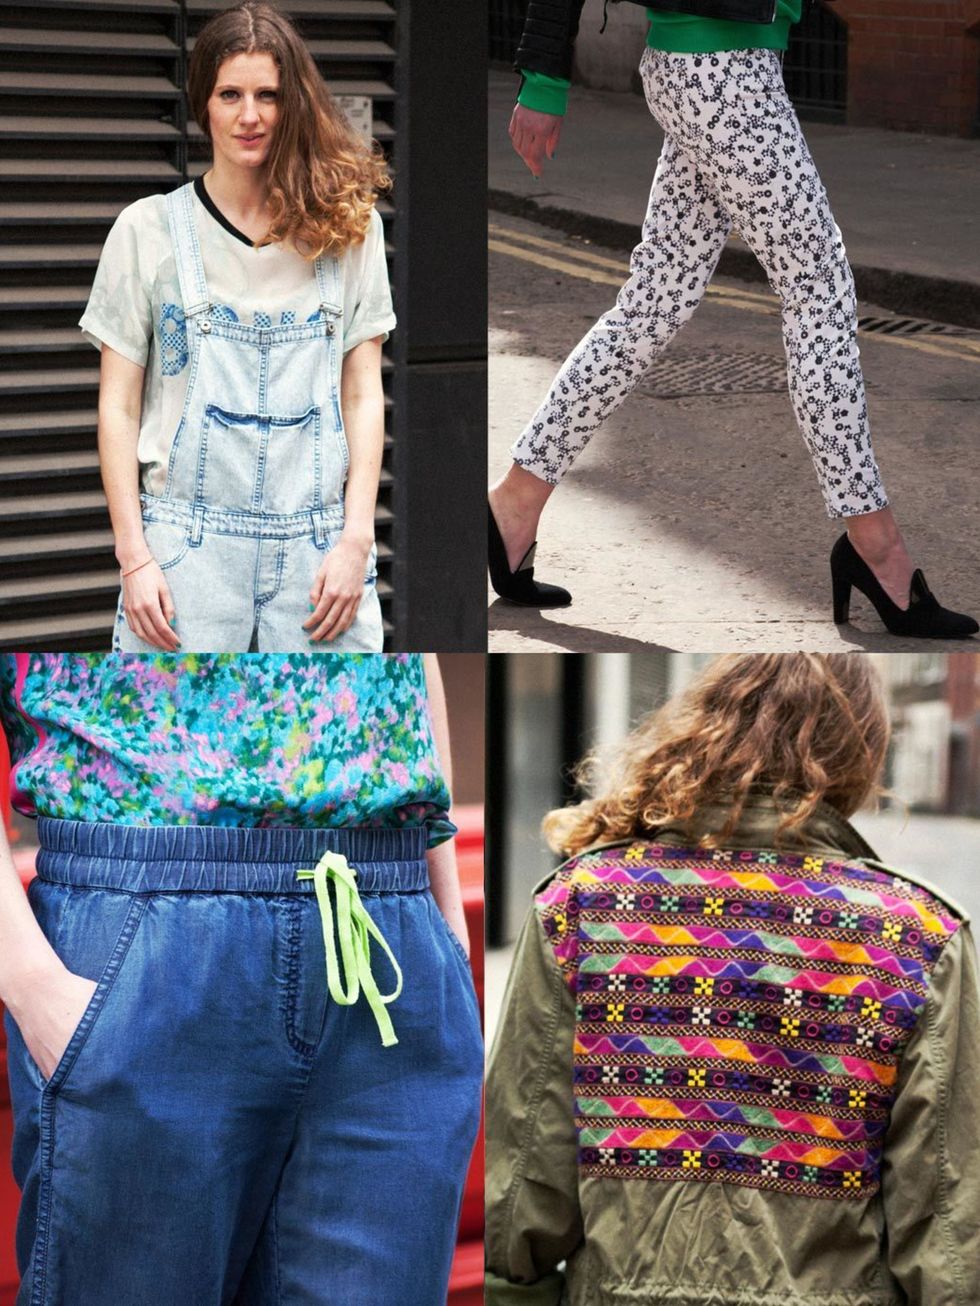 <p>It's fair to say that my wardrobe simply wouldn't function without <a href="http://www.elleuk.com/fashion/trends/elle-edits-denim-spring-summer-2013">denim</a>. Whether it's in the form of a perfectly fitting pair of jeans or a <a href="http://www.elle